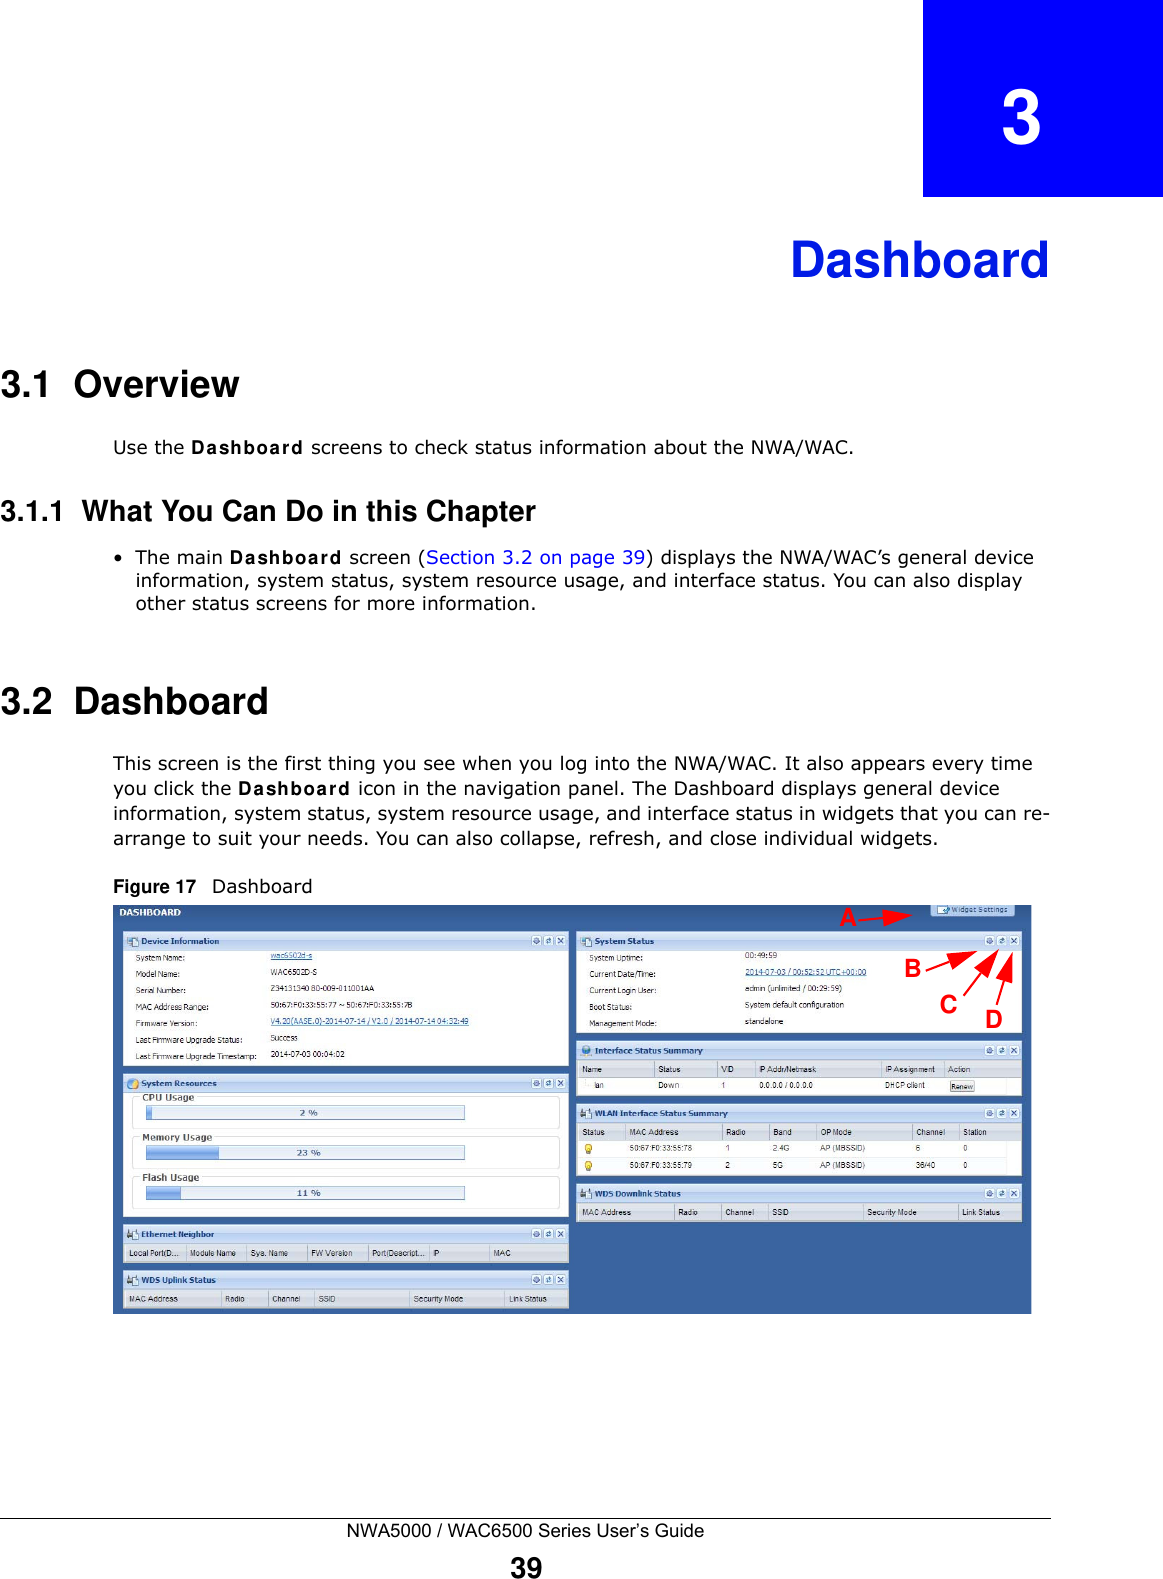 NWA5000 / WAC6500 Series User’s Guide39CHAPTER   3Dashboard3.1  OverviewUse the Da shboard screens to check status information about the NWA/WAC.3.1.1  What You Can Do in this Chapter•The main Dashboar d screen (Section 3.2 on page 39) displays the NWA/WAC’s general device information, system status, system resource usage, and interface status. You can also display other status screens for more information.3.2  DashboardThis screen is the first thing you see when you log into the NWA/WAC. It also appears every time you click the Dash boa rd icon in the navigation panel. The Dashboard displays general device information, system status, system resource usage, and interface status in widgets that you can re-arrange to suit your needs. You can also collapse, refresh, and close individual widgets.Figure 17   Dashboard BCDA